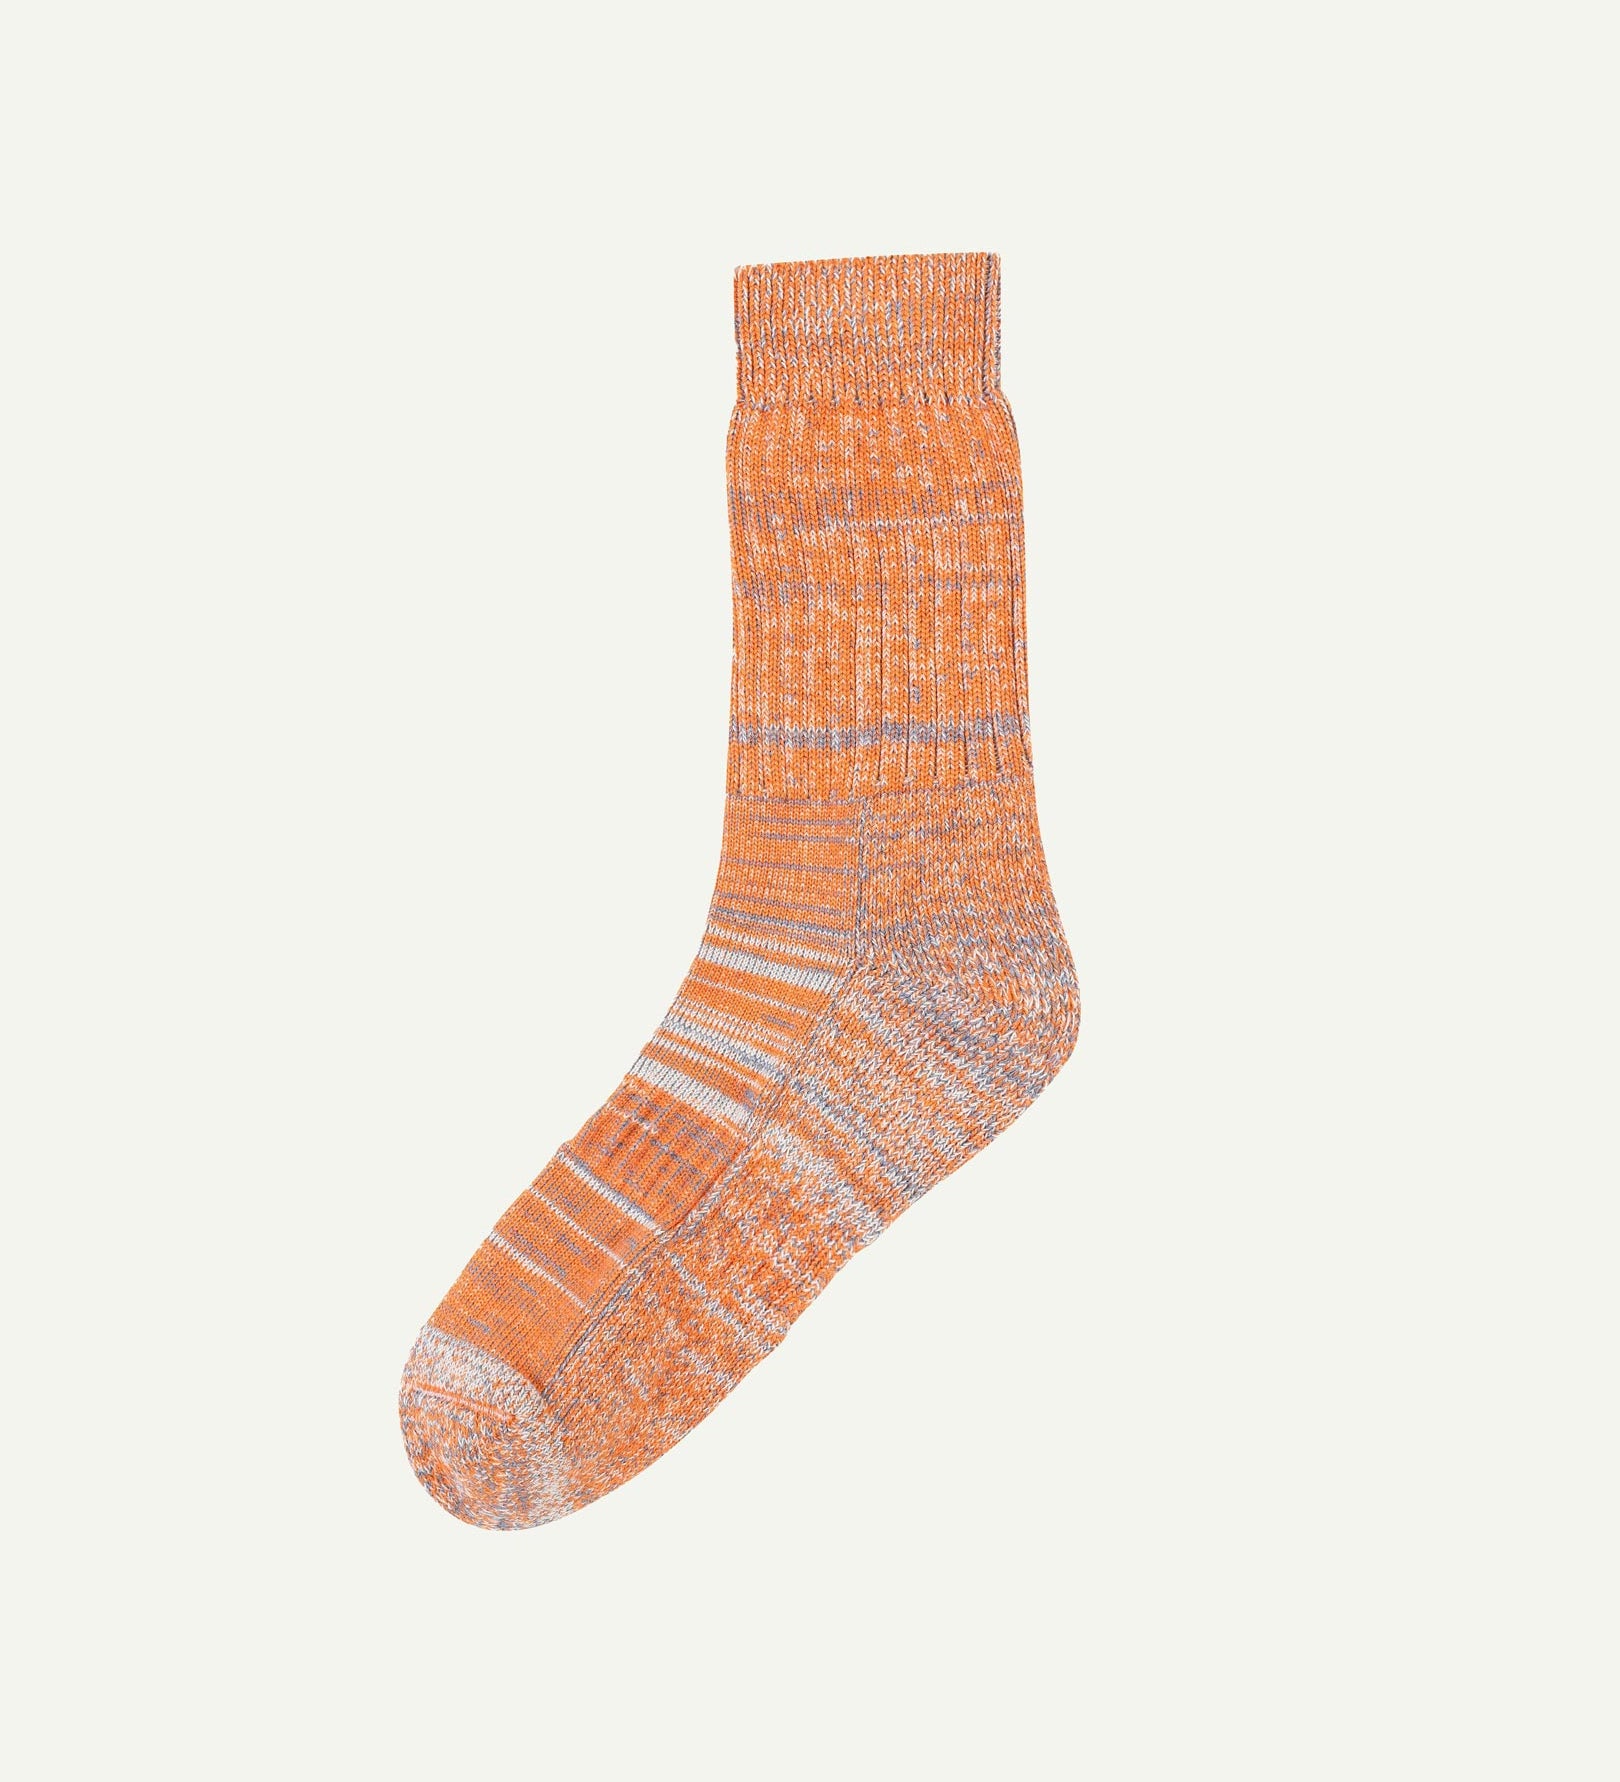 Flat view of Uskees 4006 gold mix organic cotton sock, showing bands of gold-orange, navy and beige.